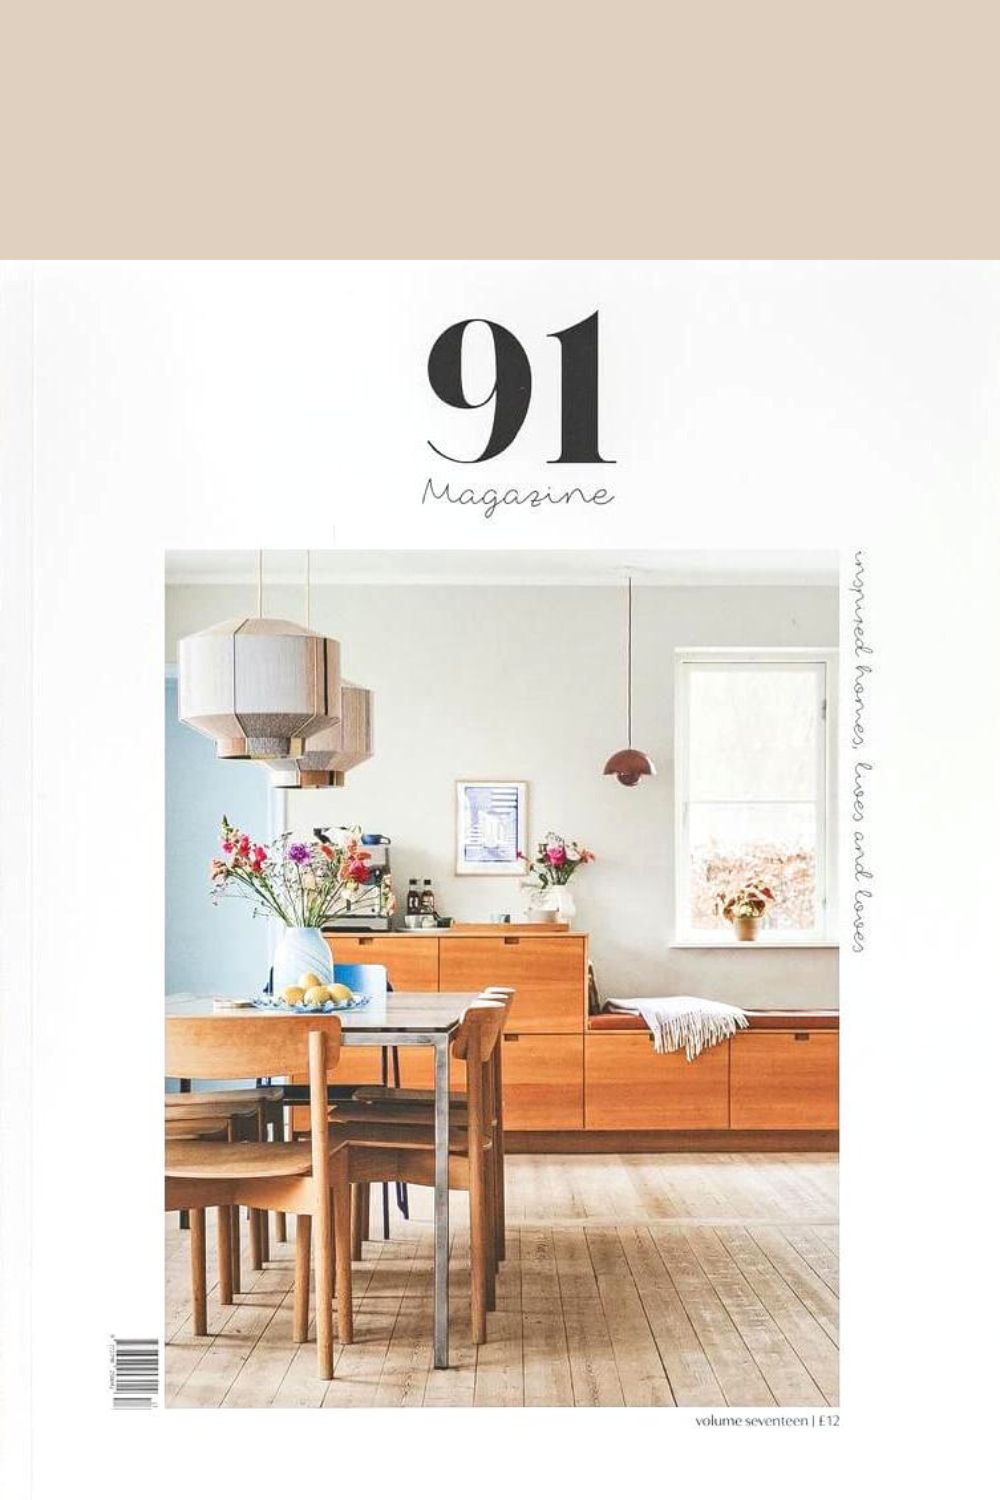 91 Magazine Volume 17 cover (calm interiors shot of dining table)